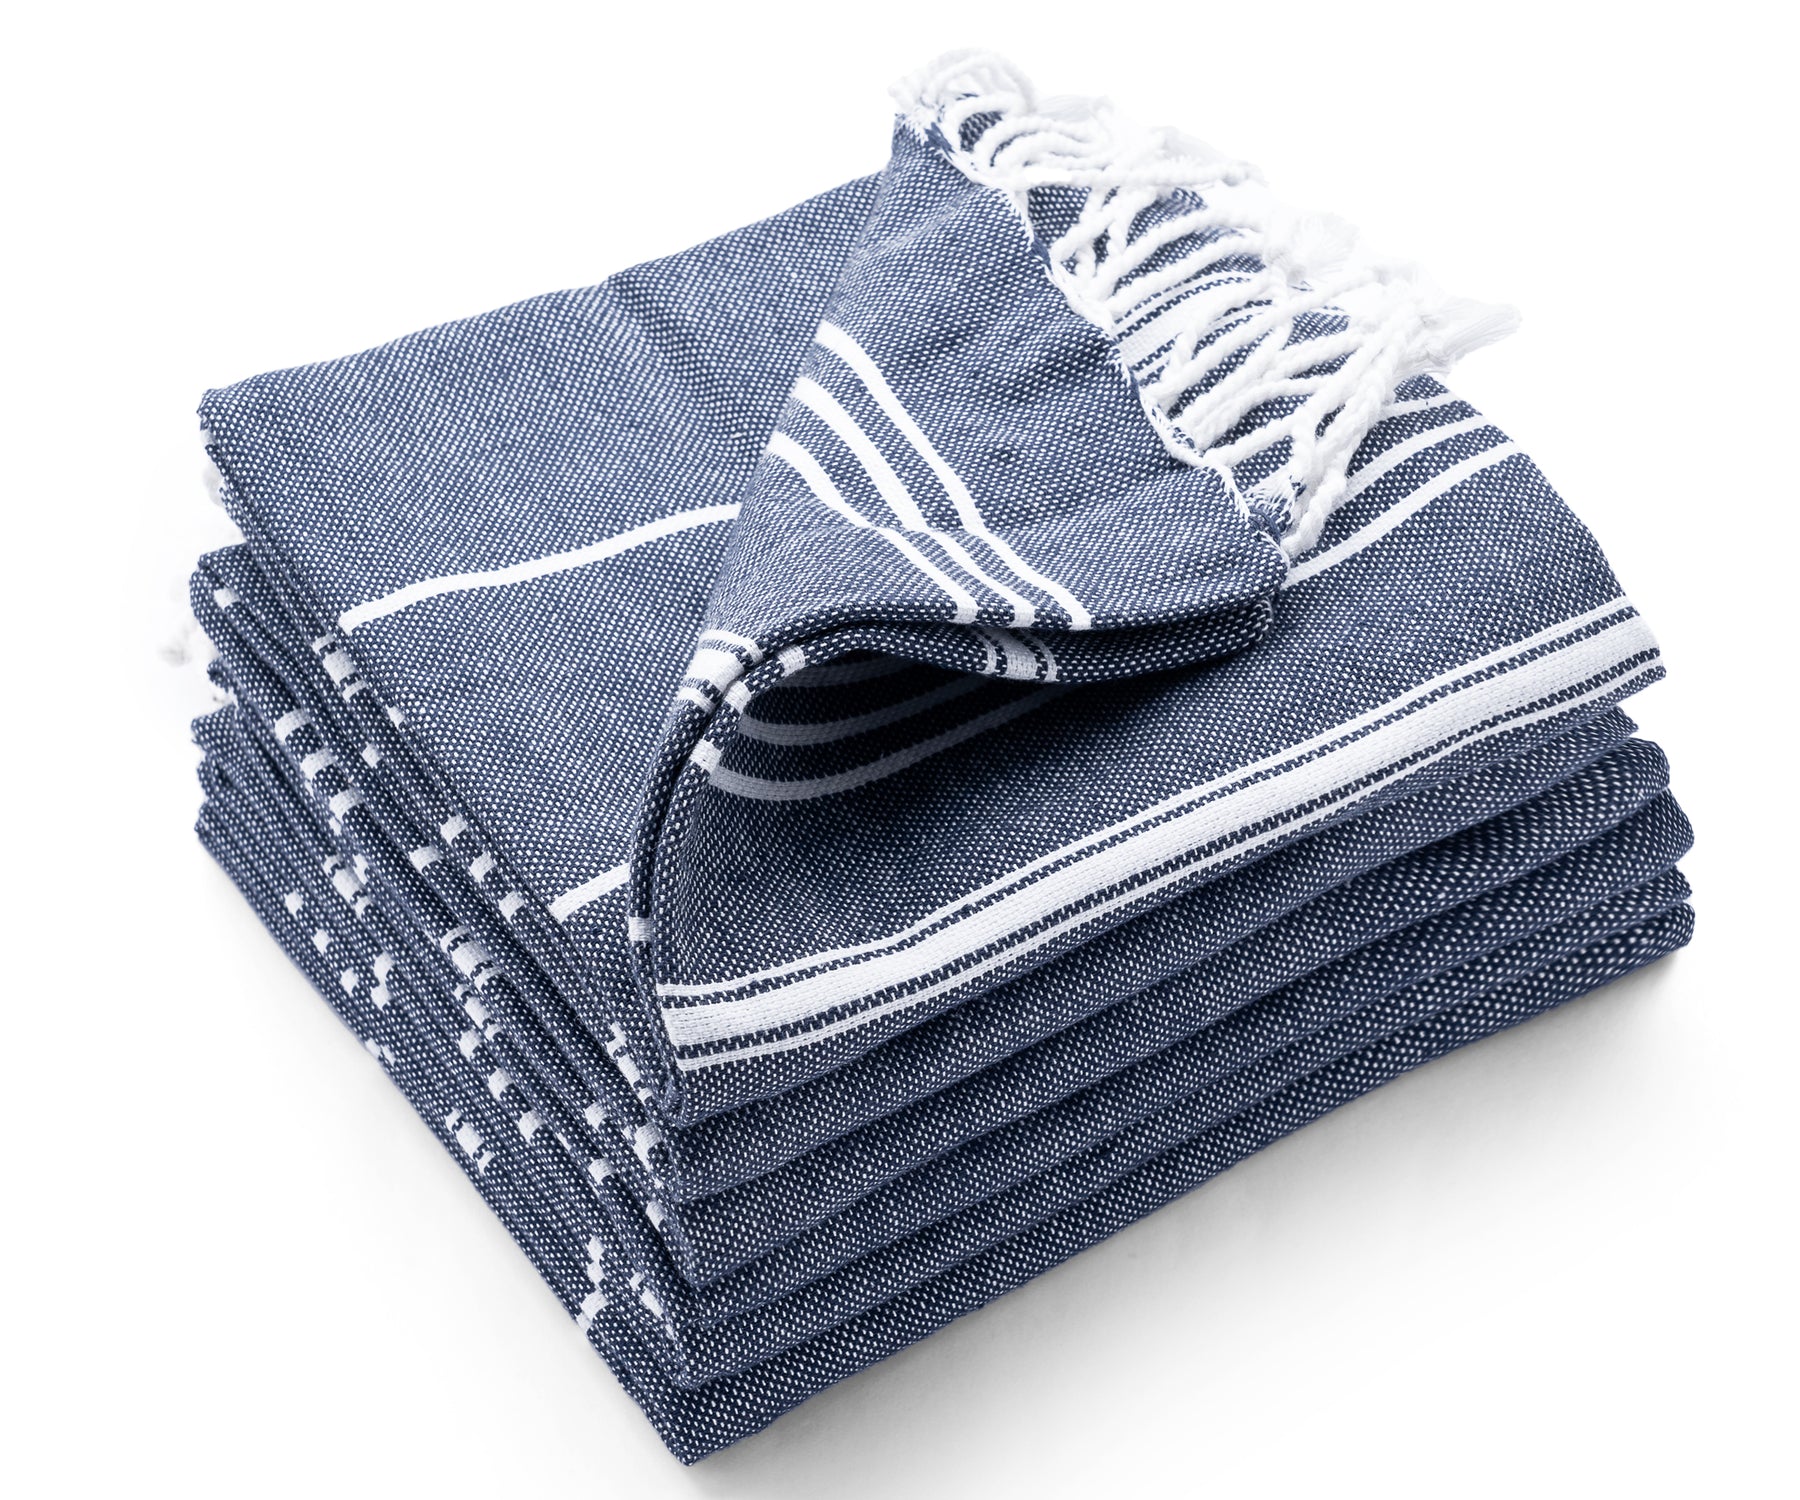 Striped Towels, kitchen hanging hand tie towel, never falls off, 16x26,  TM(4), copyright 2019 — Comfy Kitchen Creations